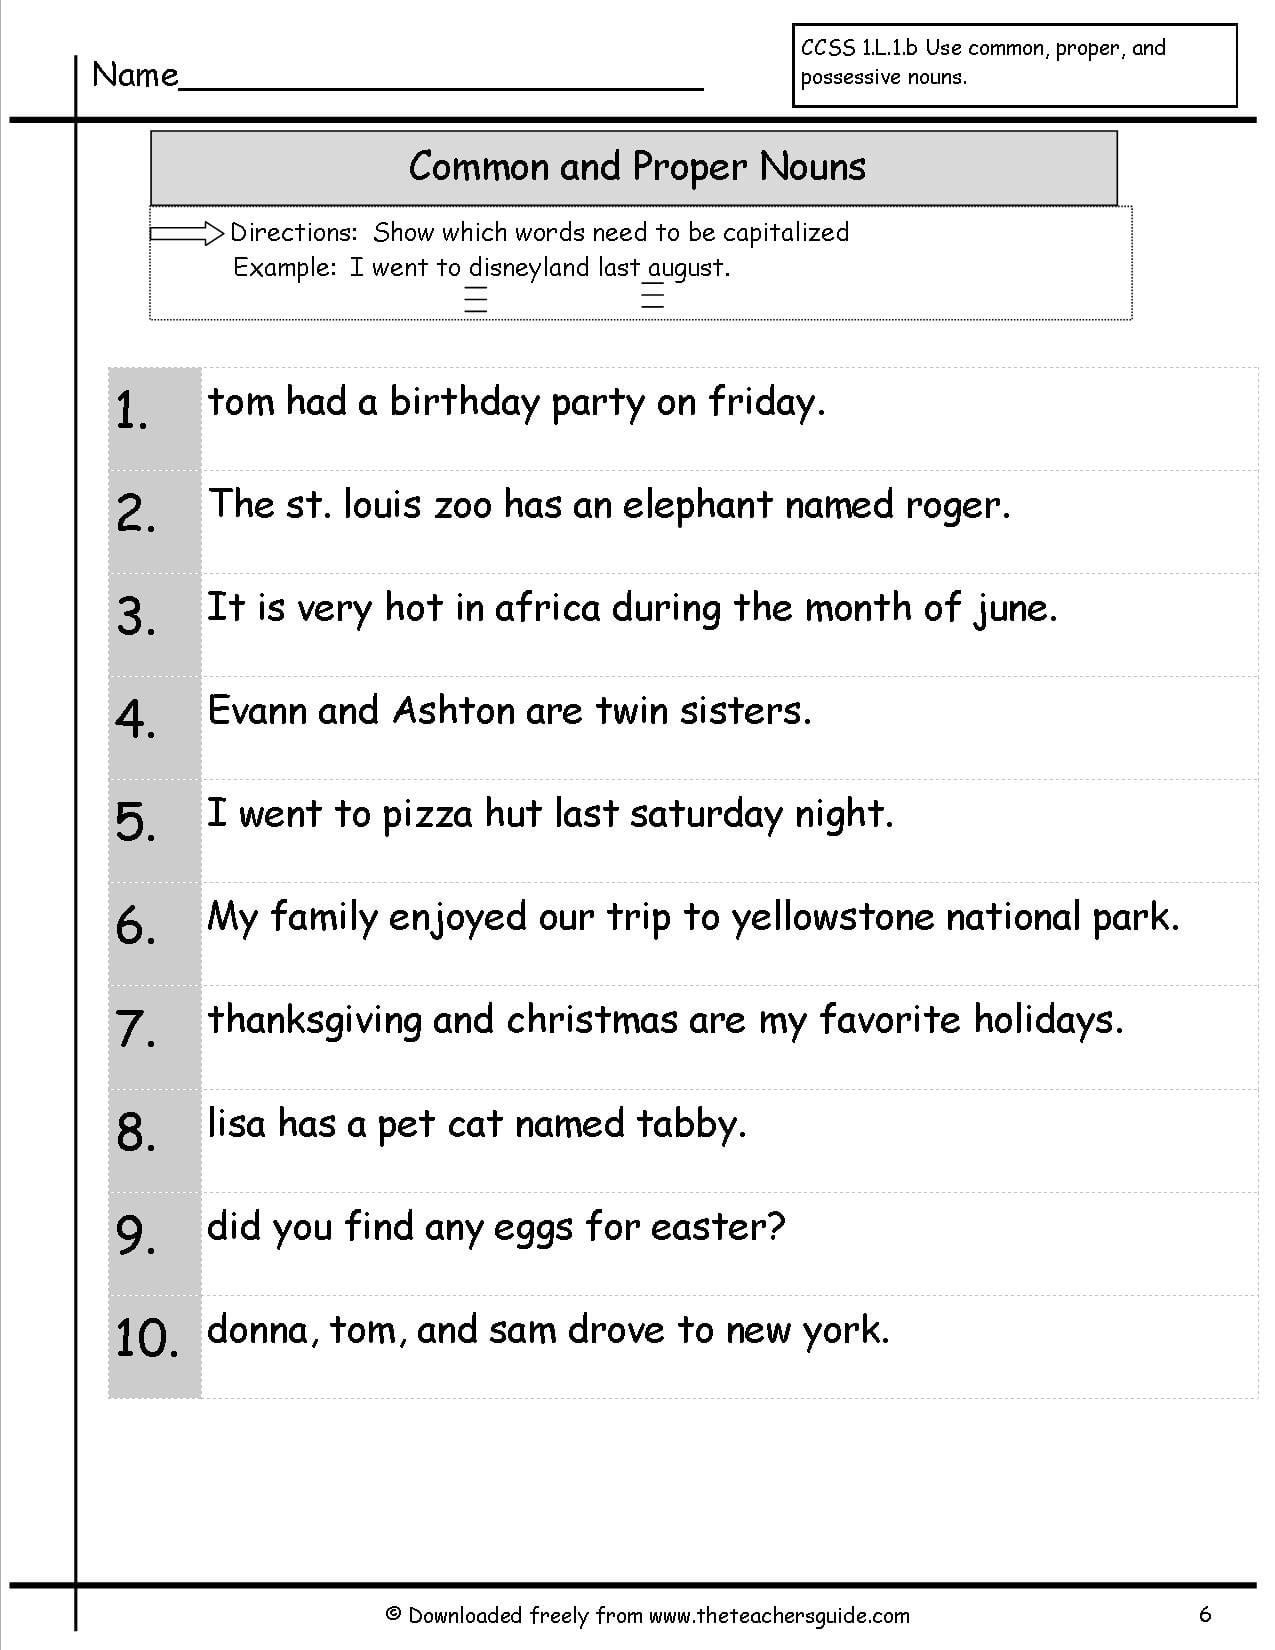 Common And Proper Nouns Worksheets From The Teacher's Guide Within Common And Proper Nouns Worksheets For Grade 5